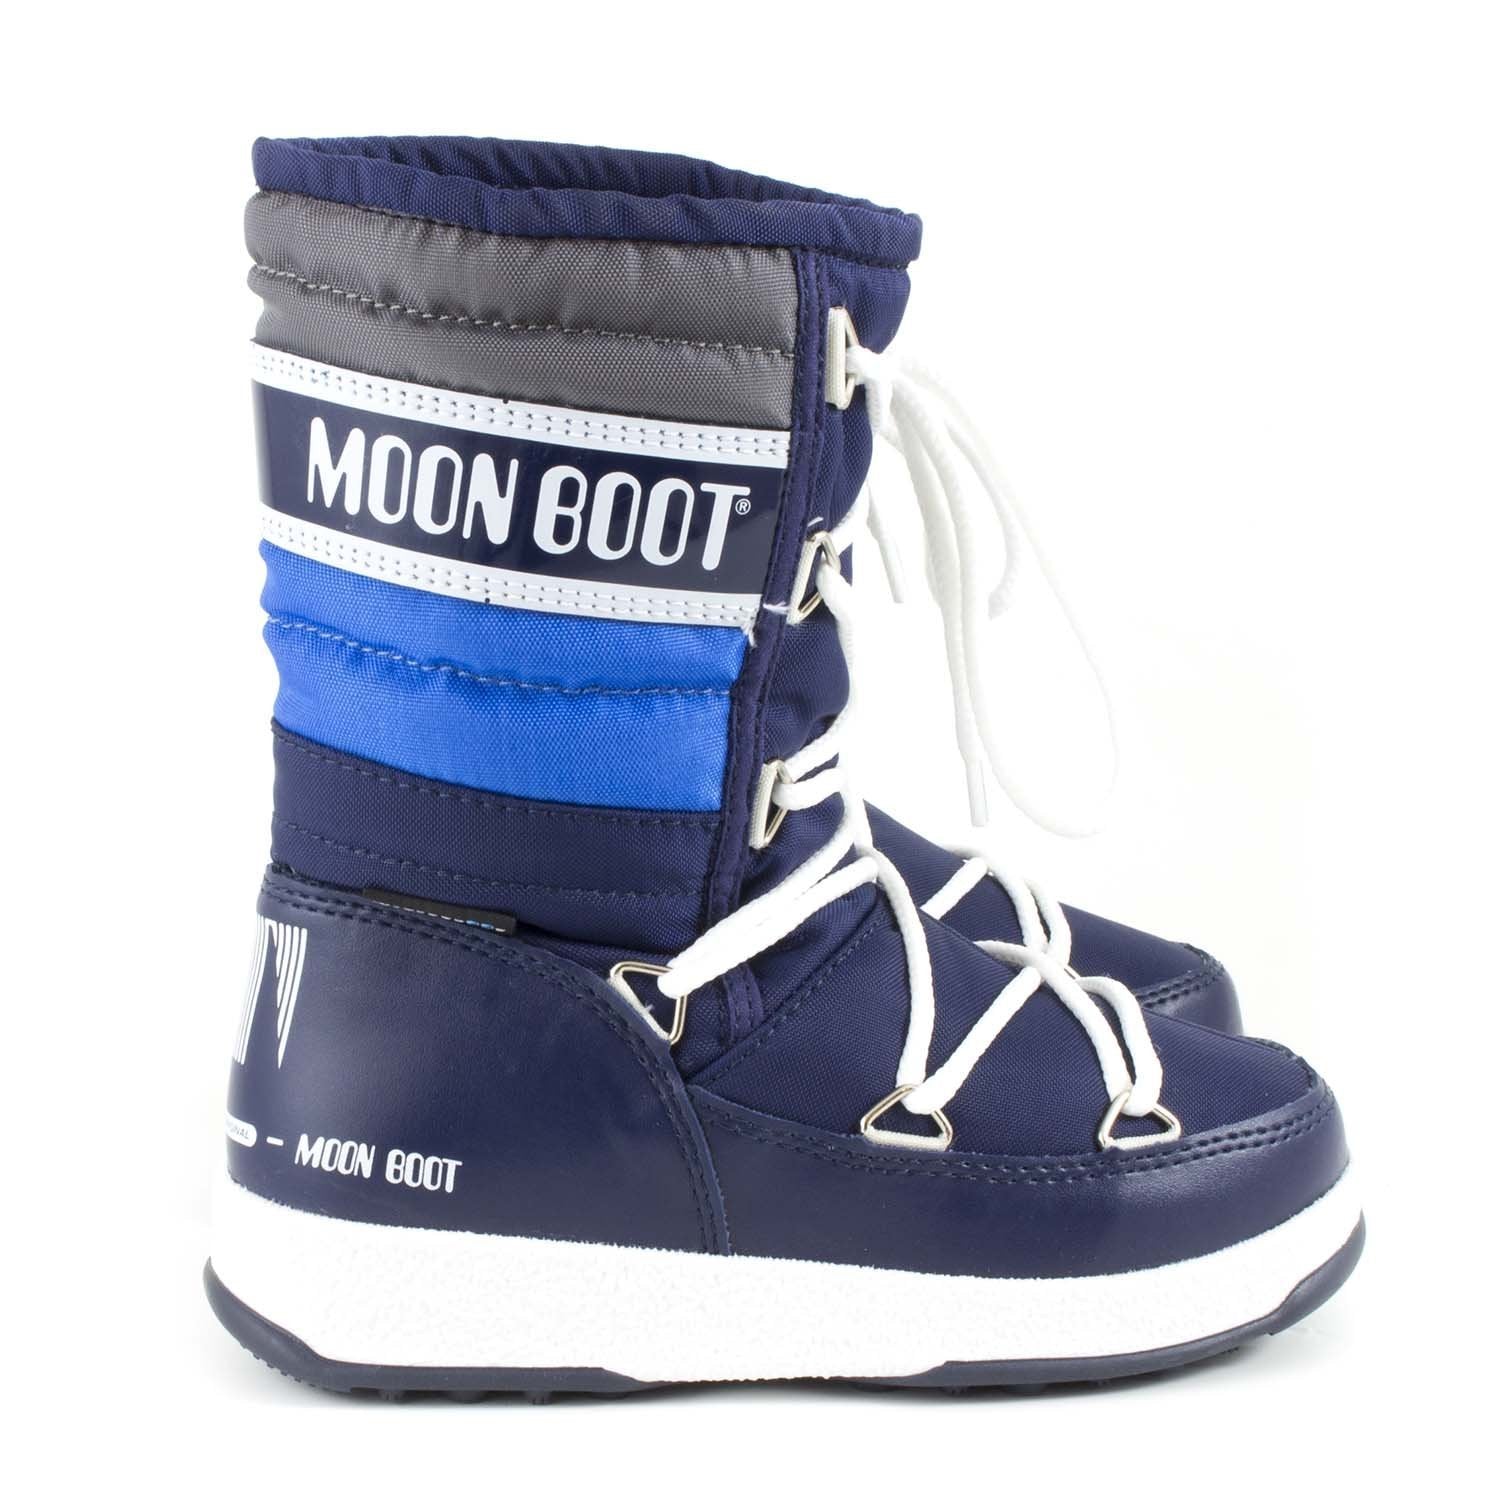 Moon Boot Quilted 1-Fille-MOON BOOT-Maralex Paris (1975668834367)